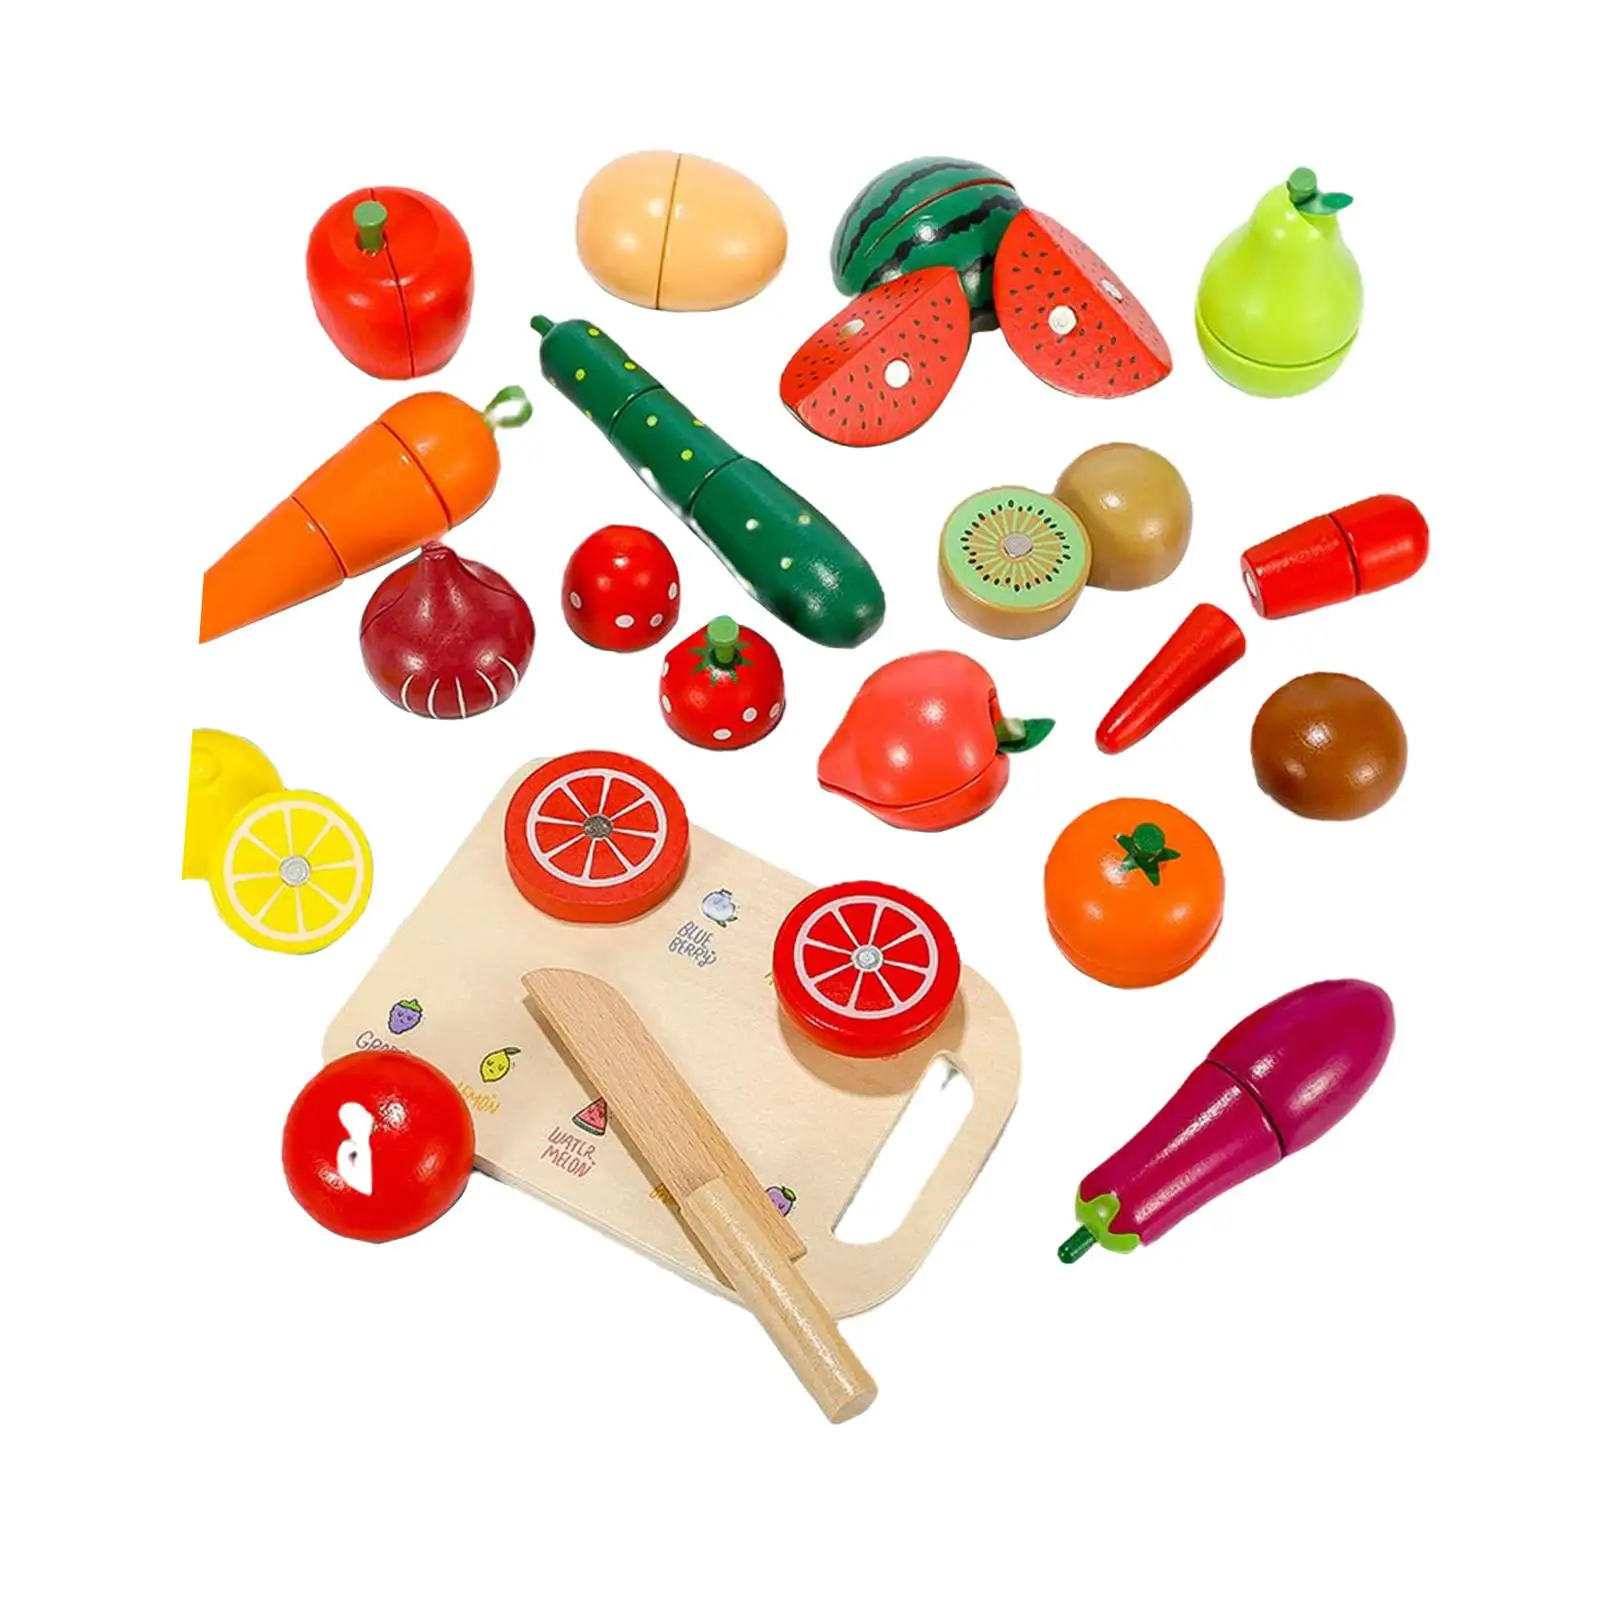 Wood Cutting Fruit Play Food Kitchen Accessories Toy Smooth Edge Durable Colorful for Kids , Boys, Girls Gift Easily Store